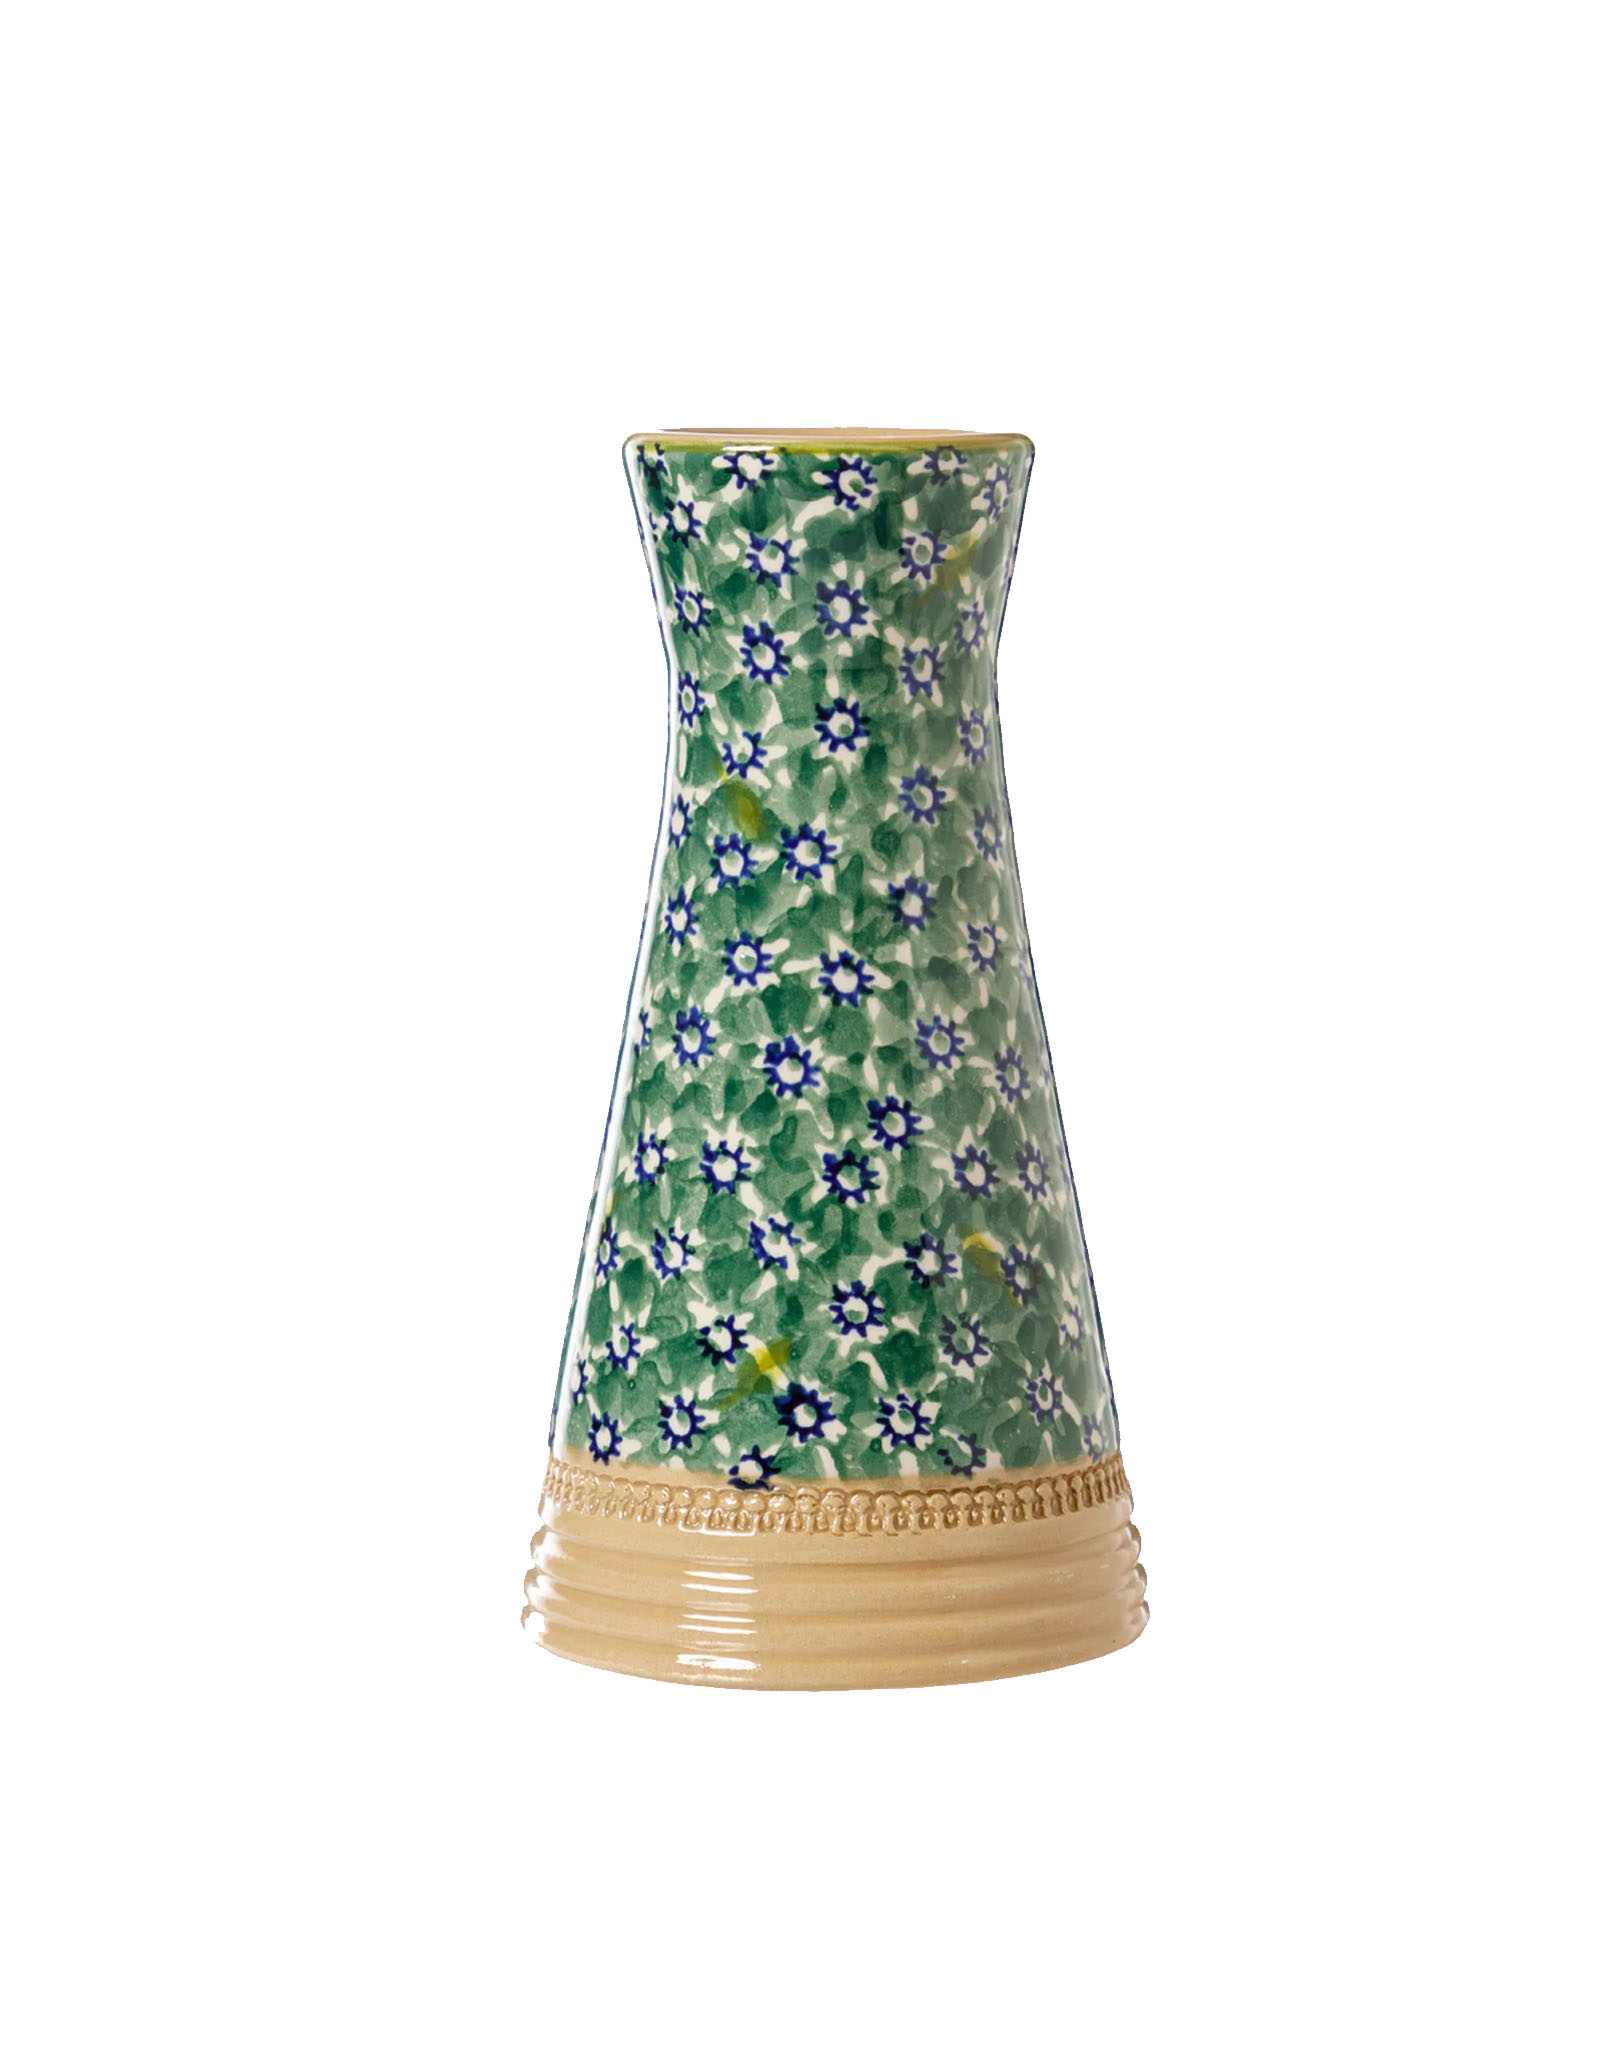 KITCHEN & ACCESSORIES NICHOLAS MOSSE SMALL TAPERED VASE - Green Lawn